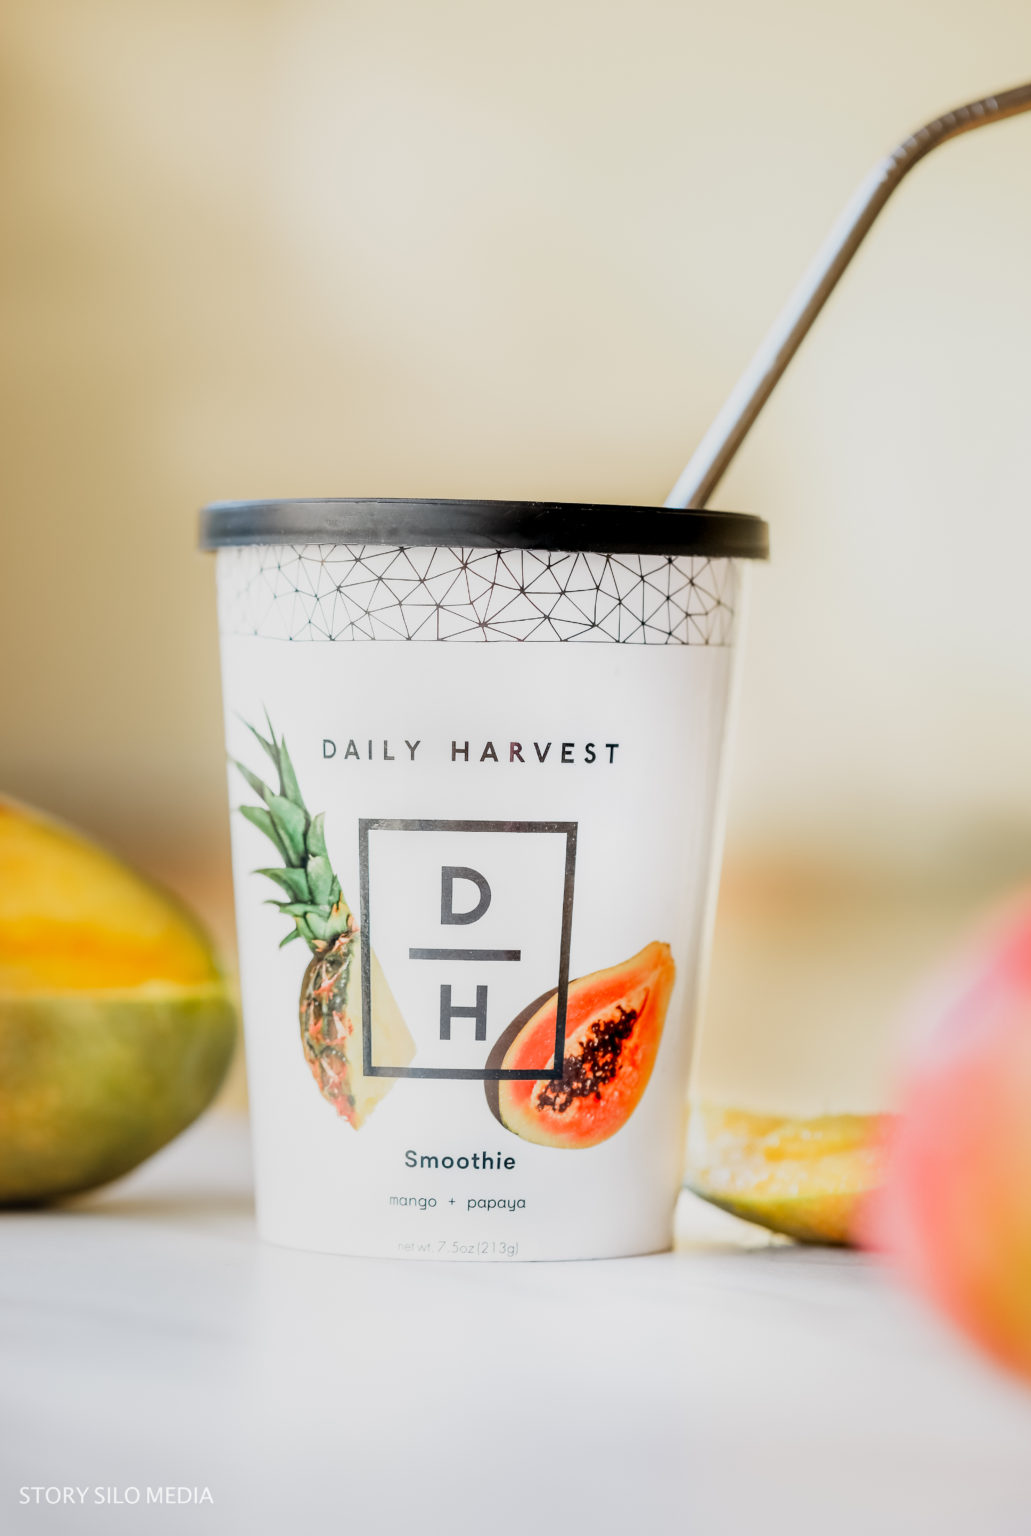 Image of a Daily Harvest Smoothie